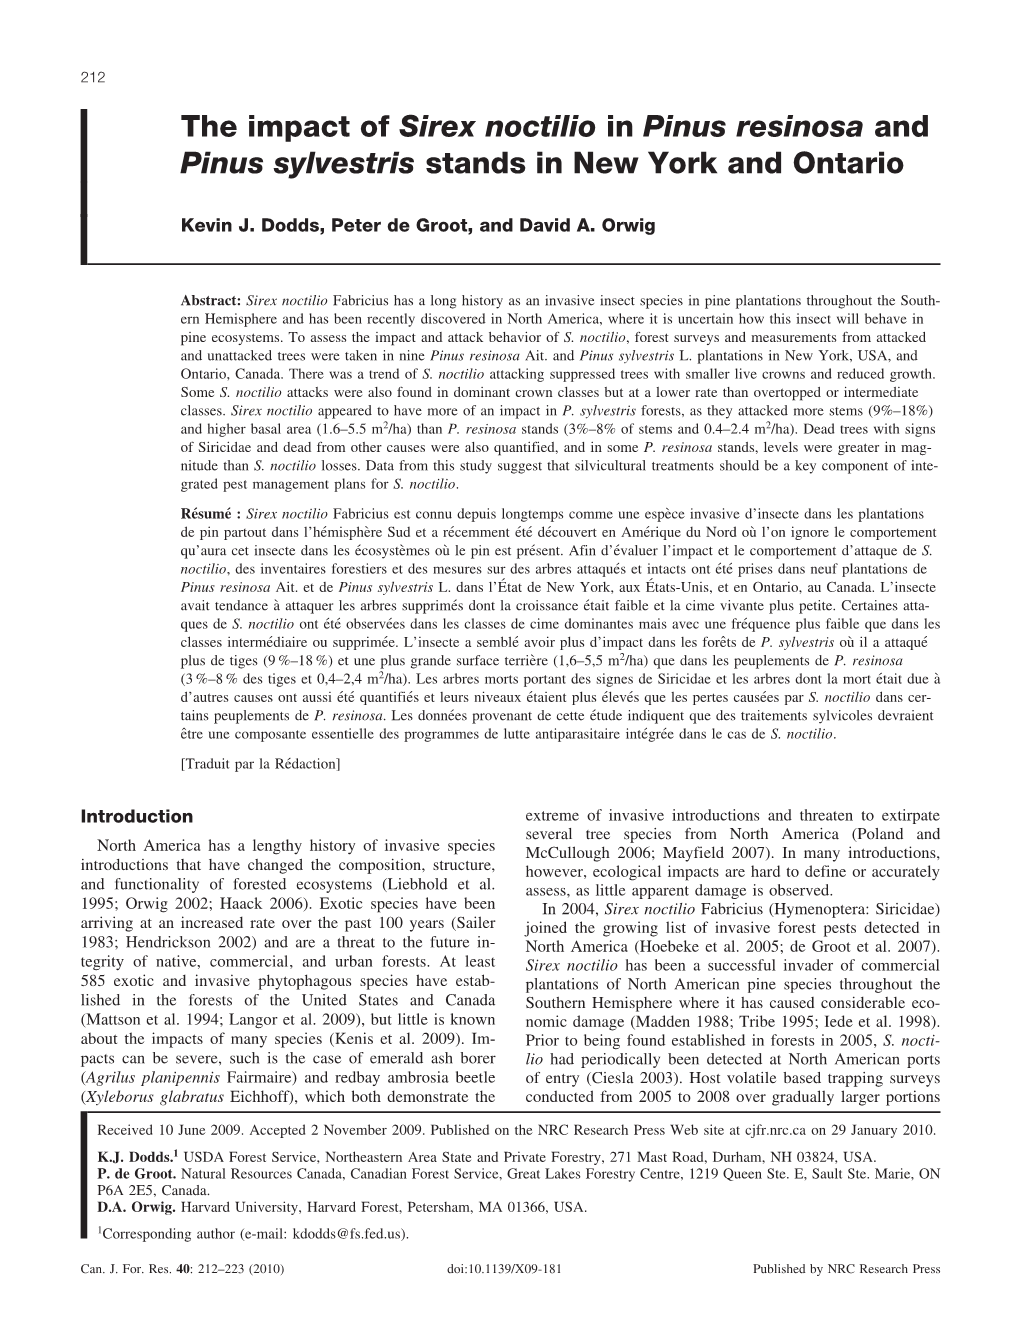 The Impact of Sirex Noctilio in Pinus Resinosa and Pinus Sylvestris Stands in New York and Ontario